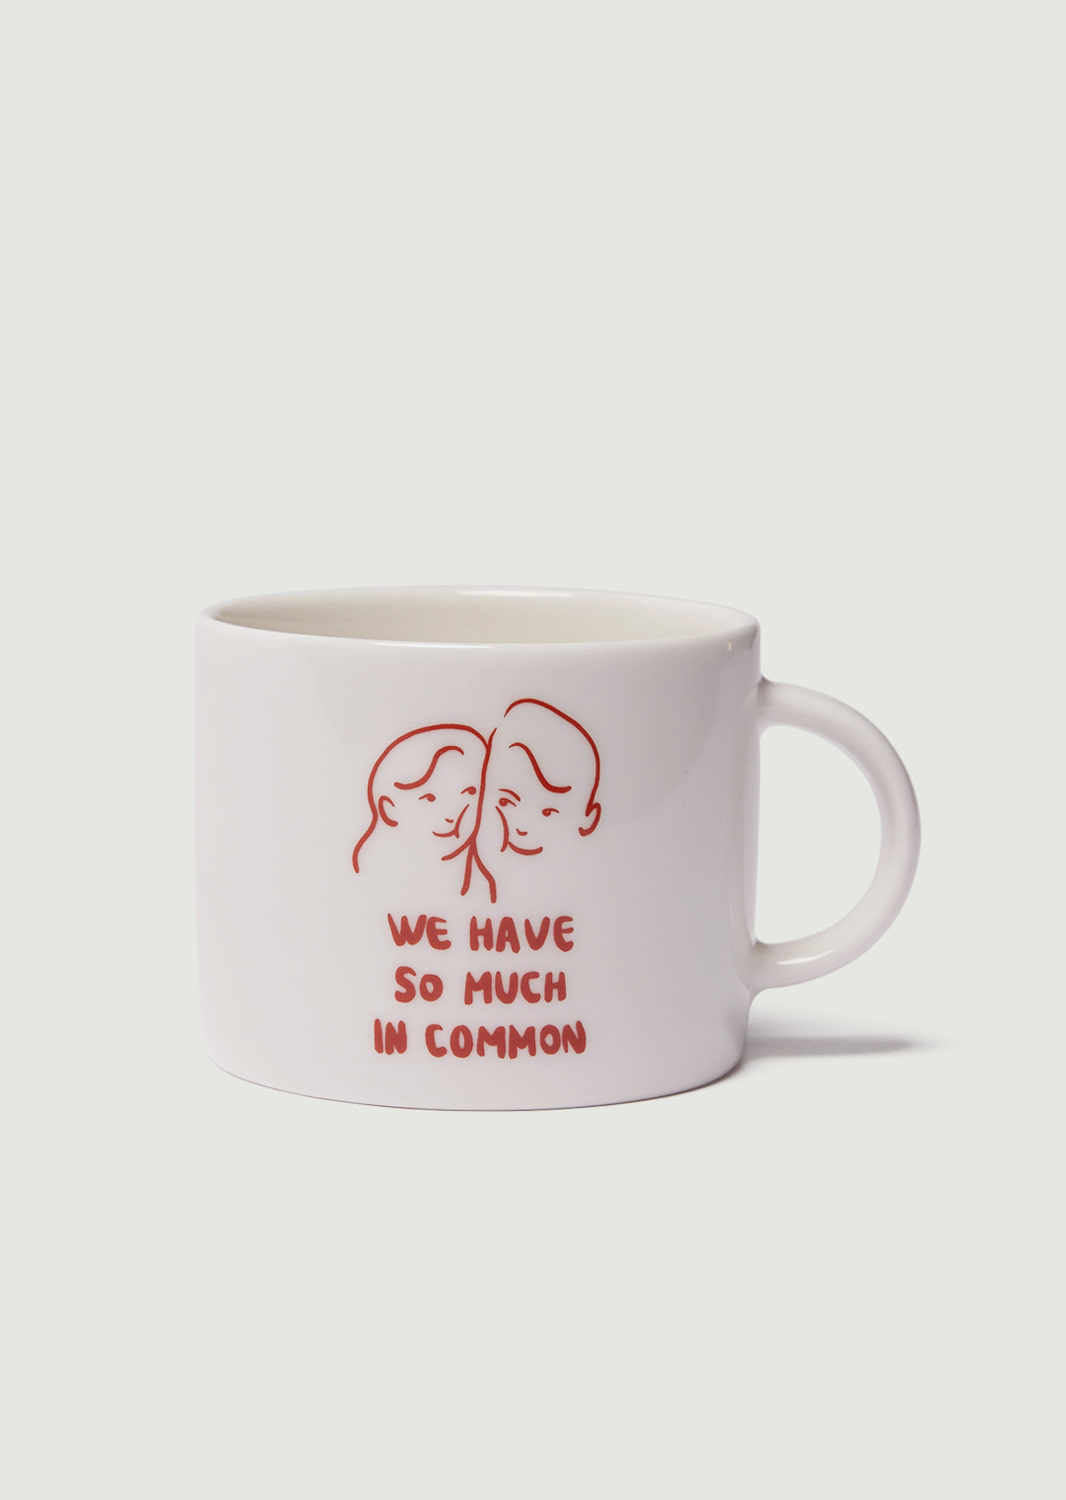 “WE HAVE SO MUCH IN COMMON” ceramic mug cup